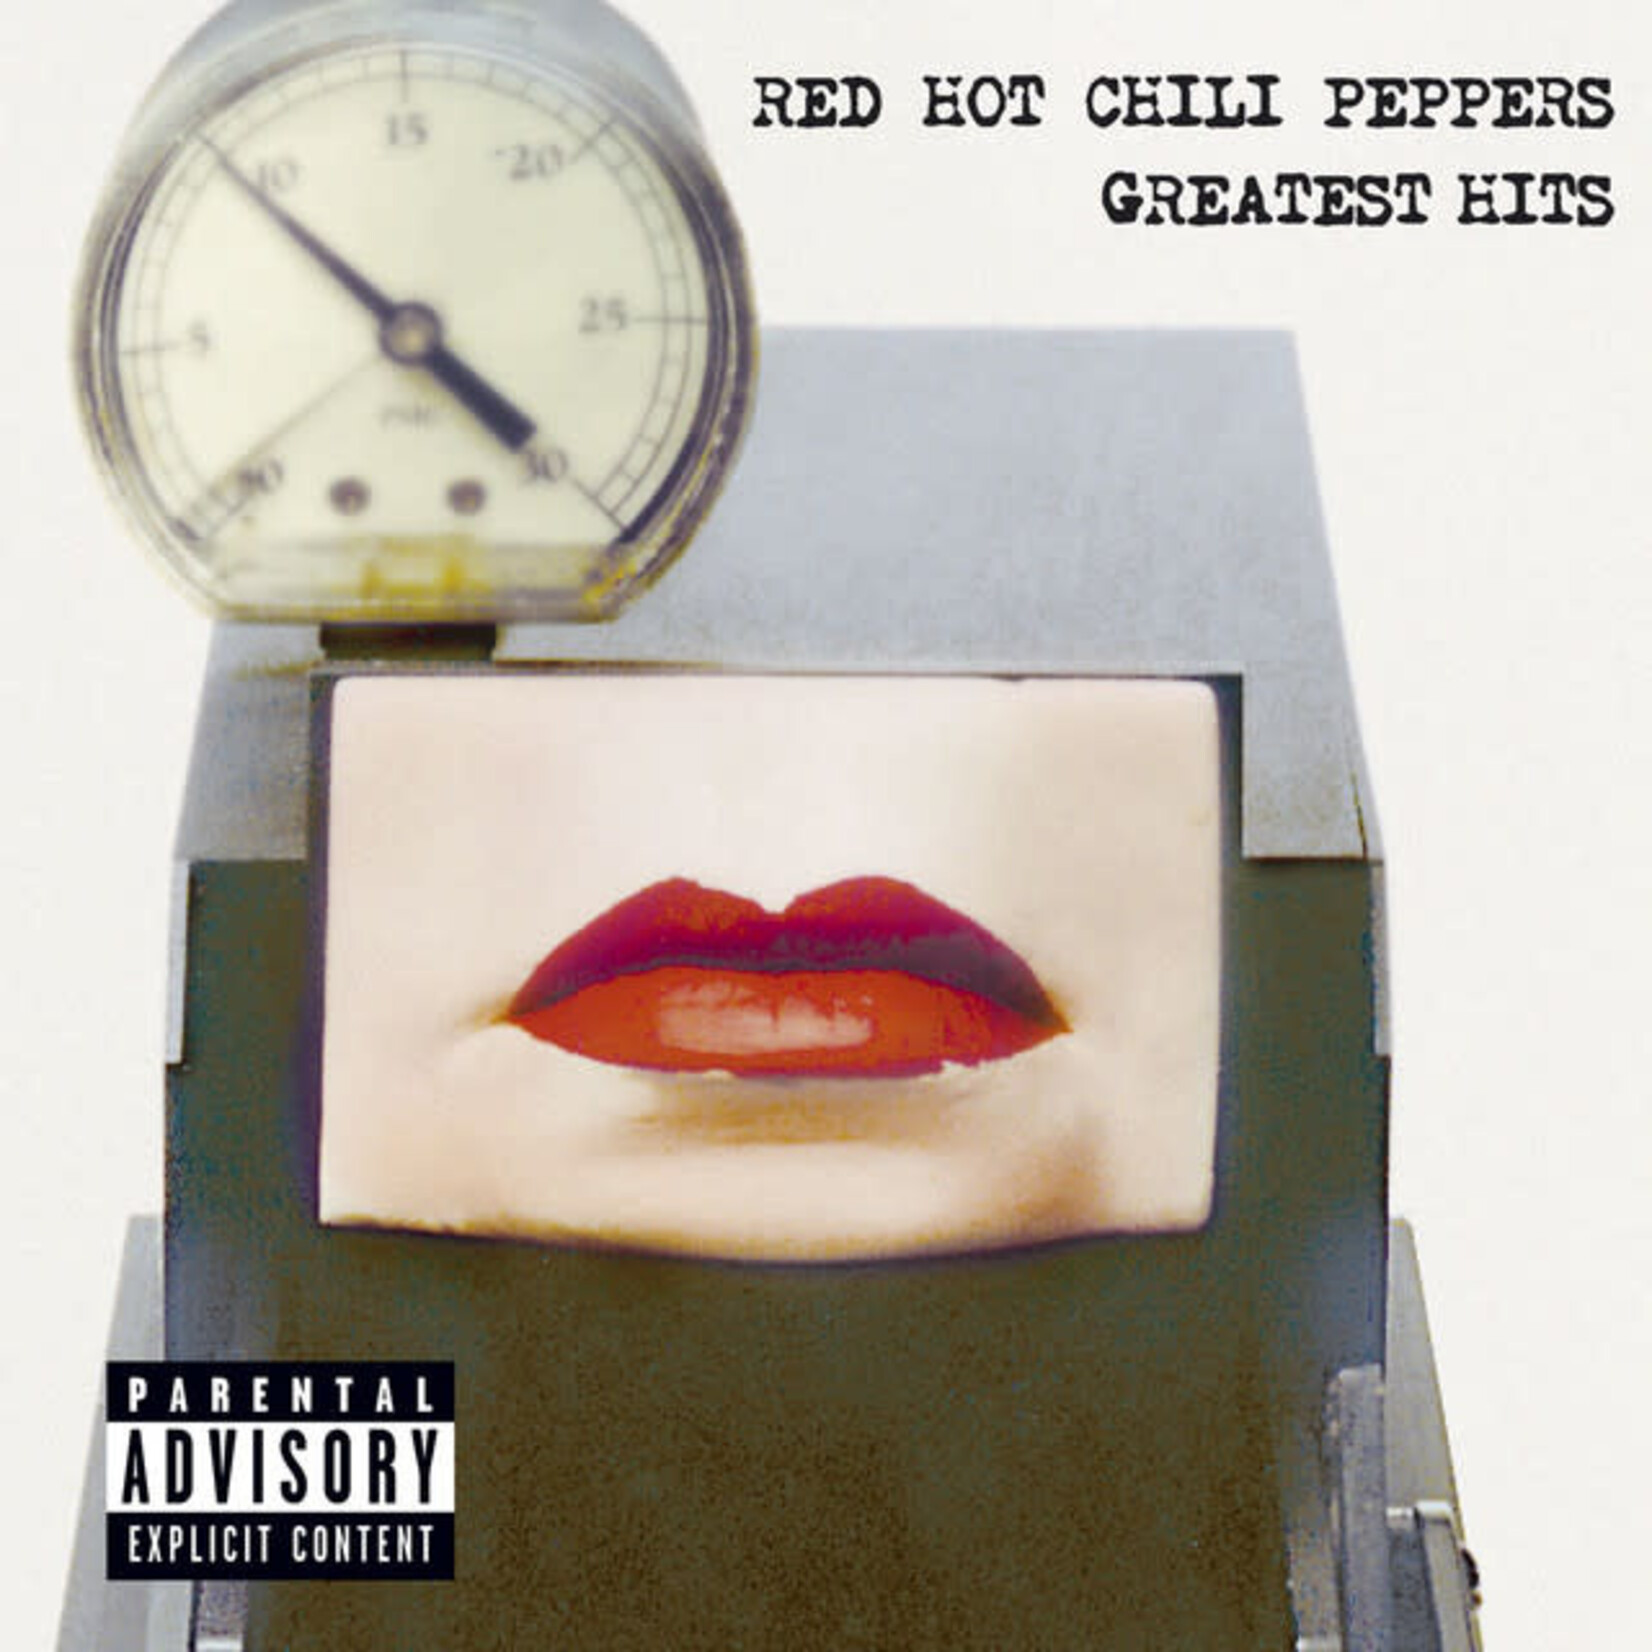 Red Hot Chili Peppers - Greatest Hits [2LP]